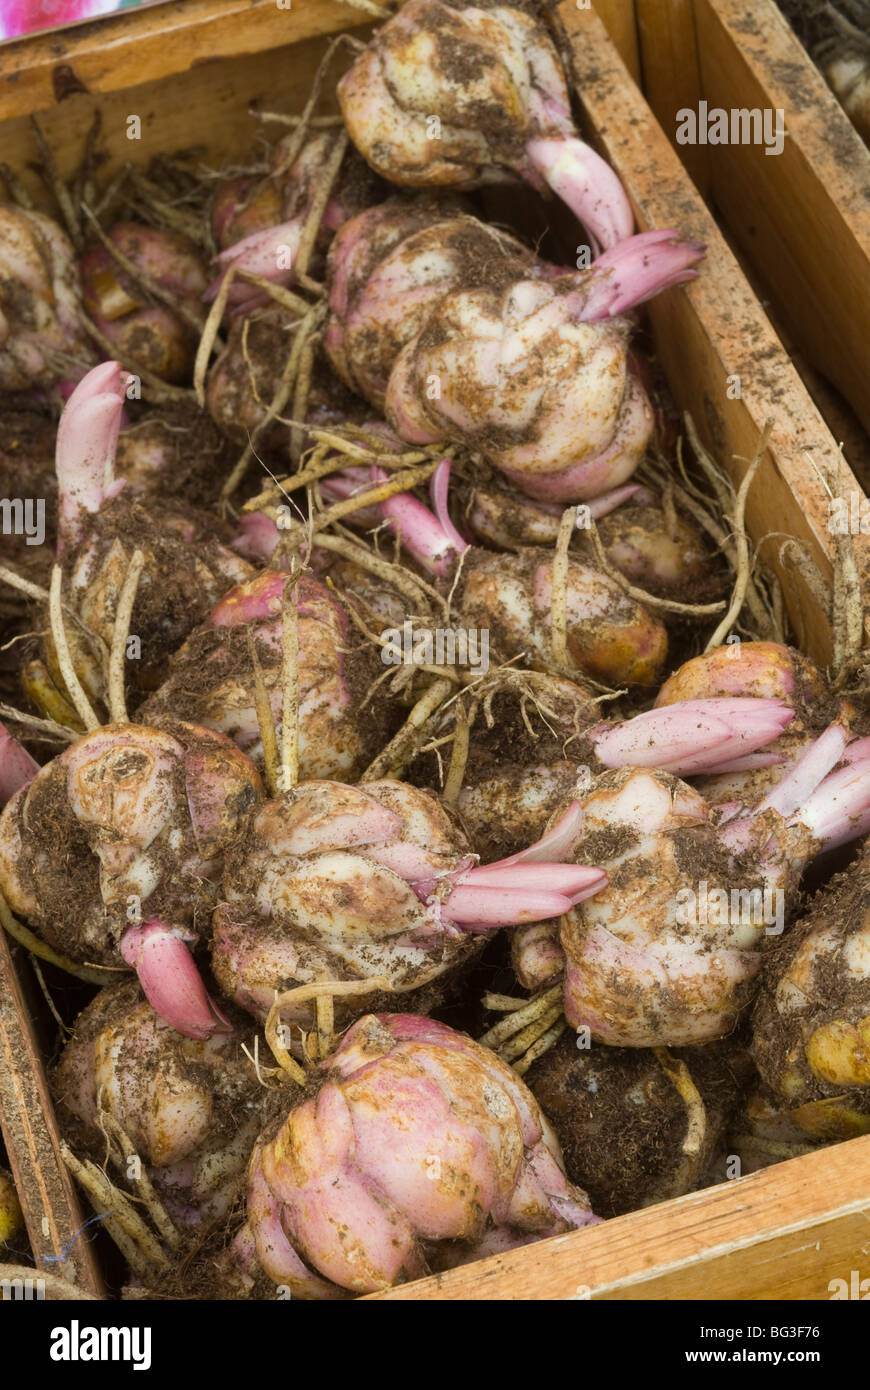 Bulbs of lilies with tuber roots and new growth in box ready to plant Stock Photo